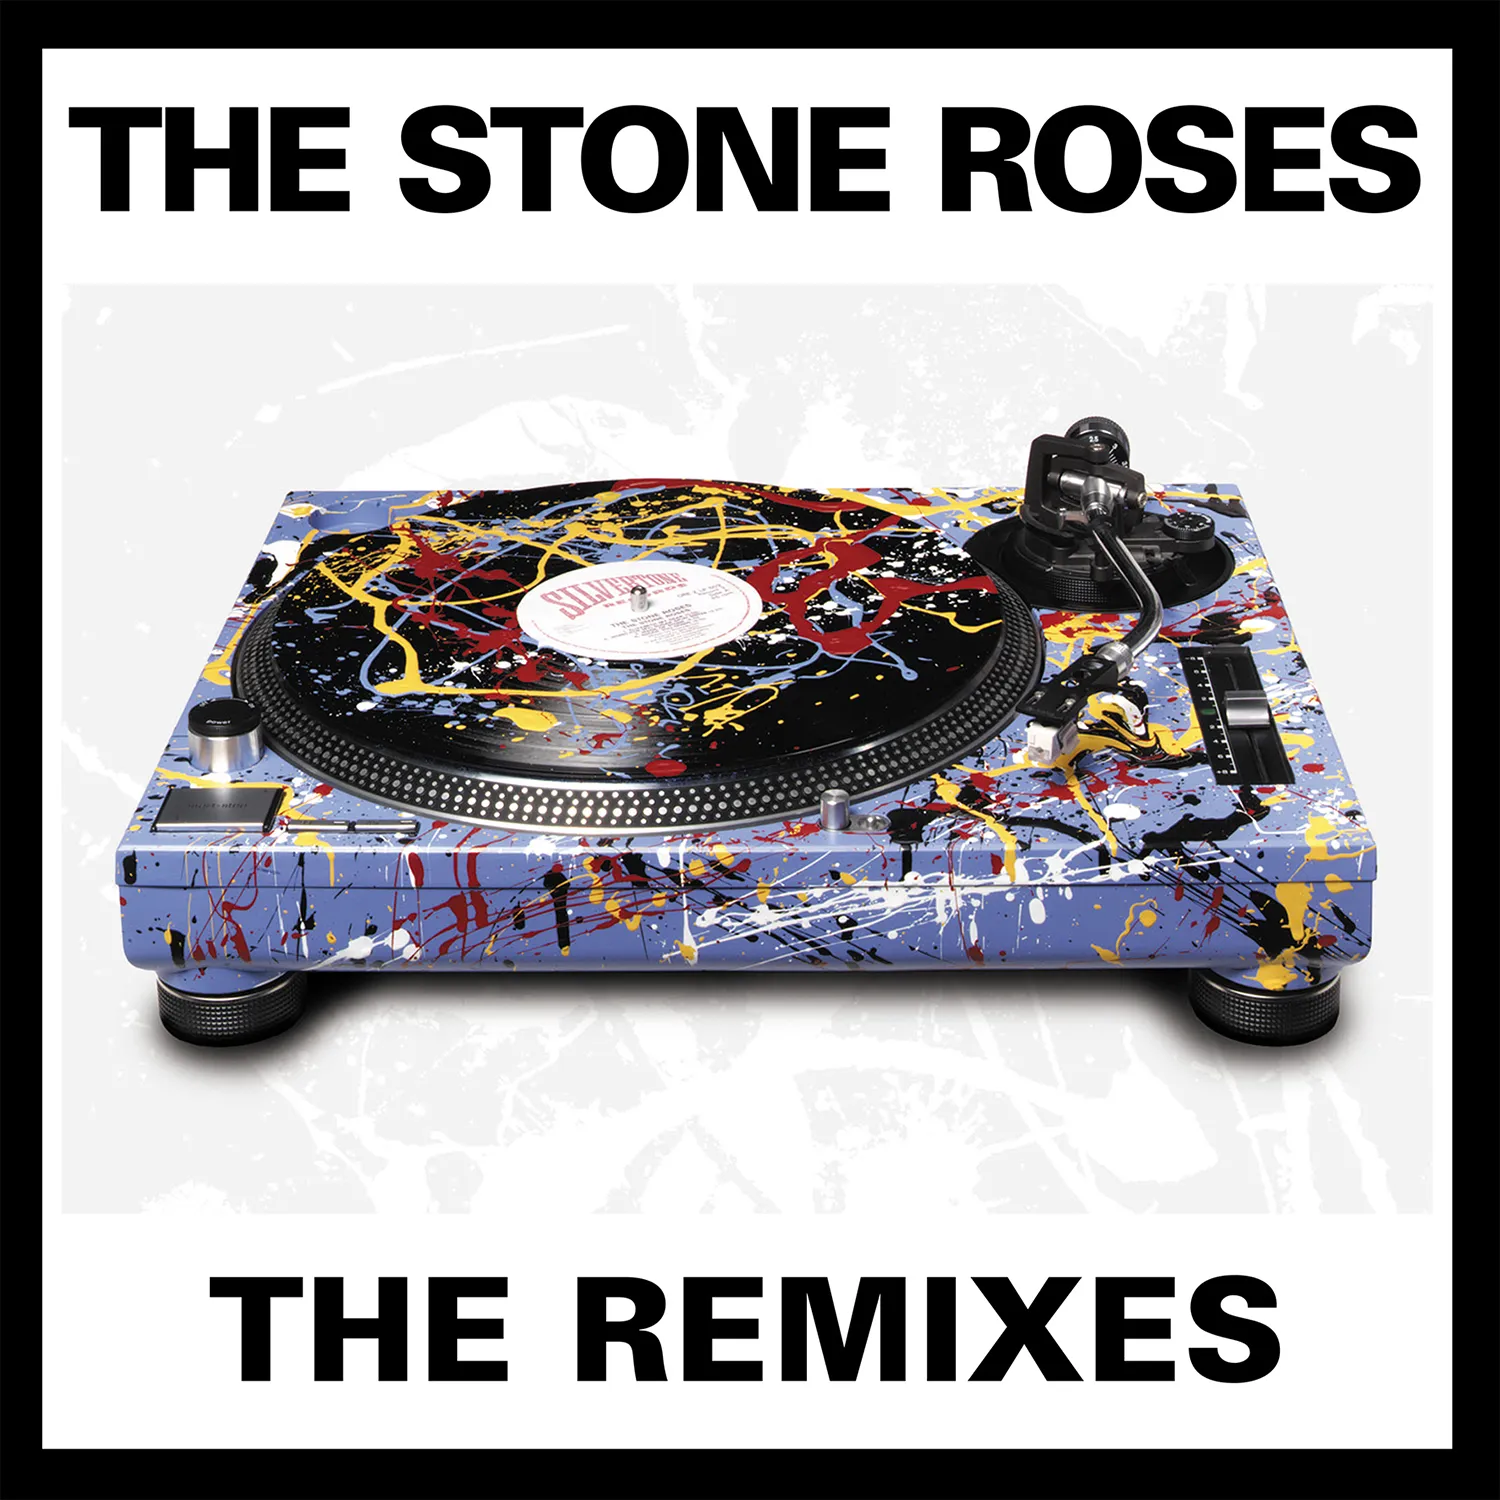 <strong>The Stone Roses - The Remixes</strong> (Vinyl LP - black)